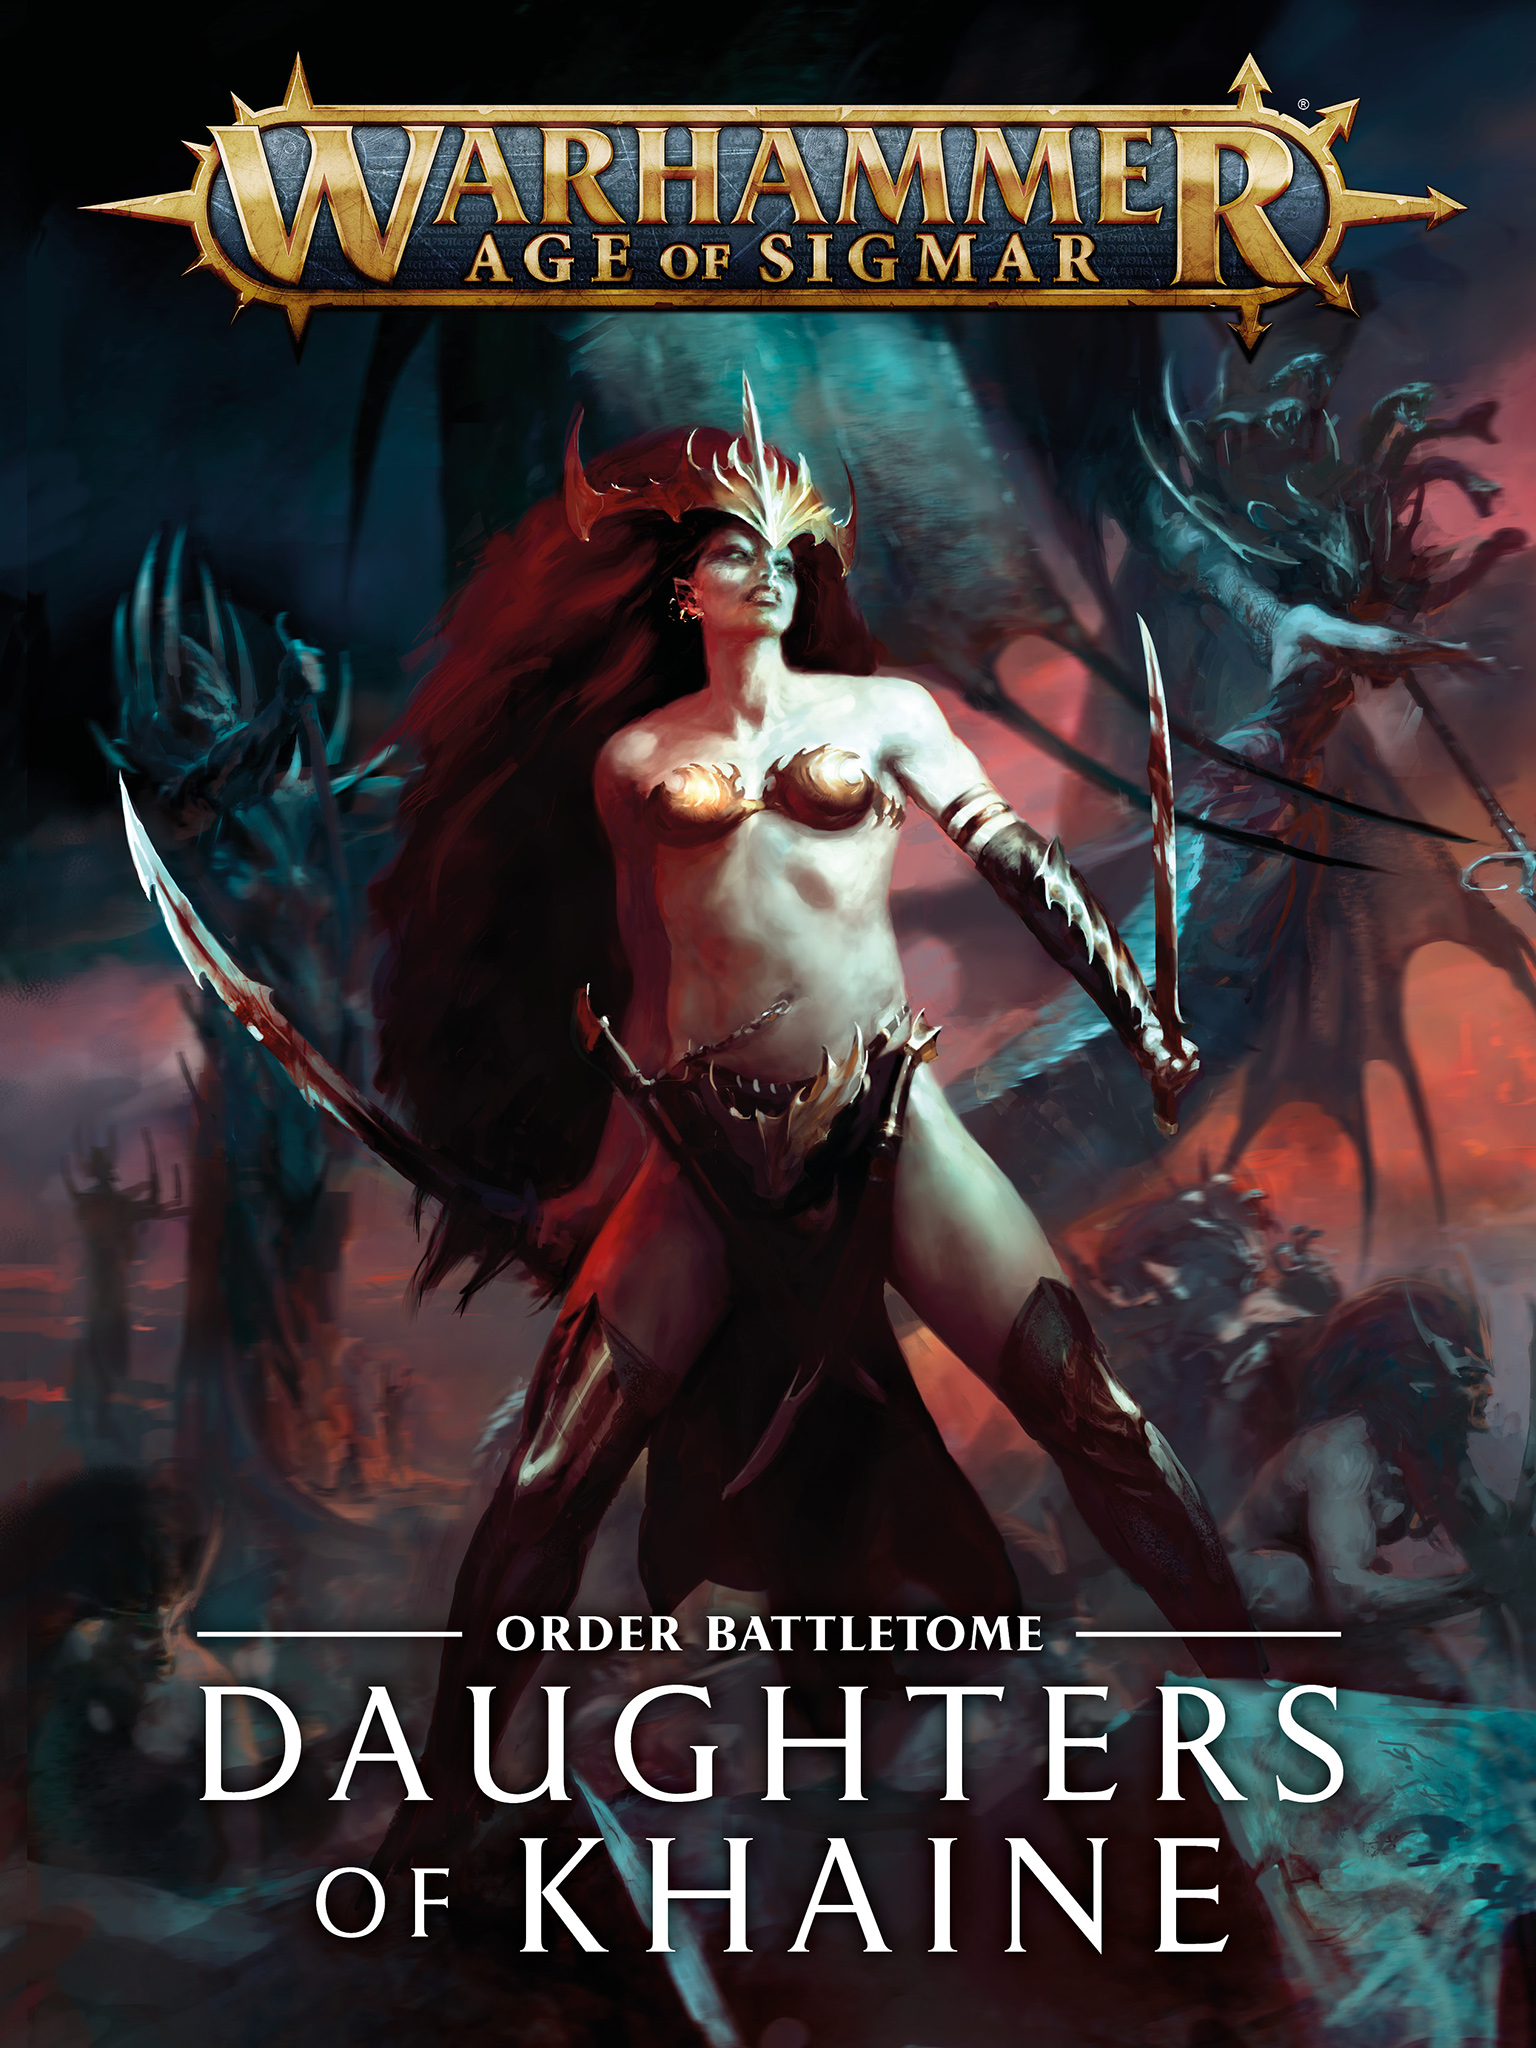 Order Battletome: Daughters of Khaine